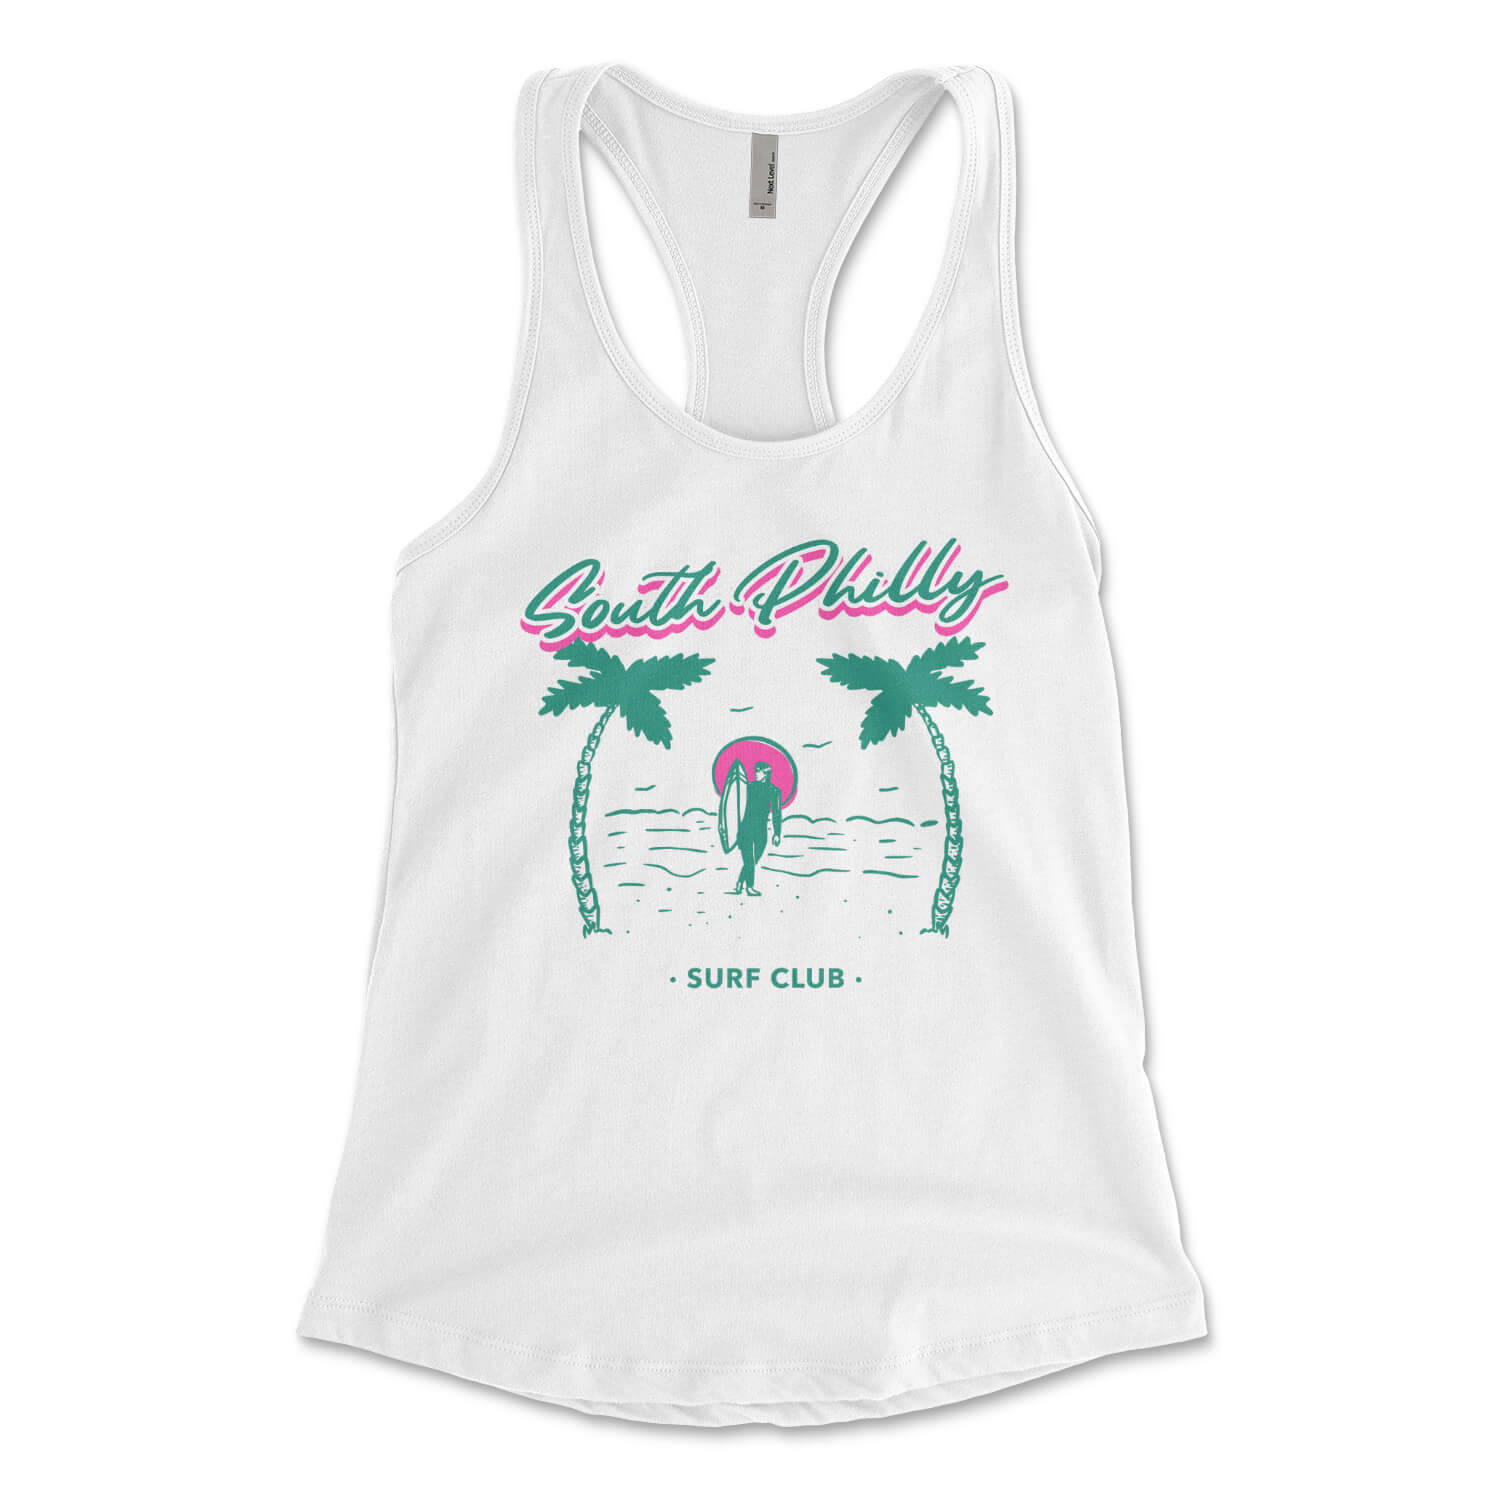 South Philly Suff Club funny womens white racerback tank top from Phillygoat